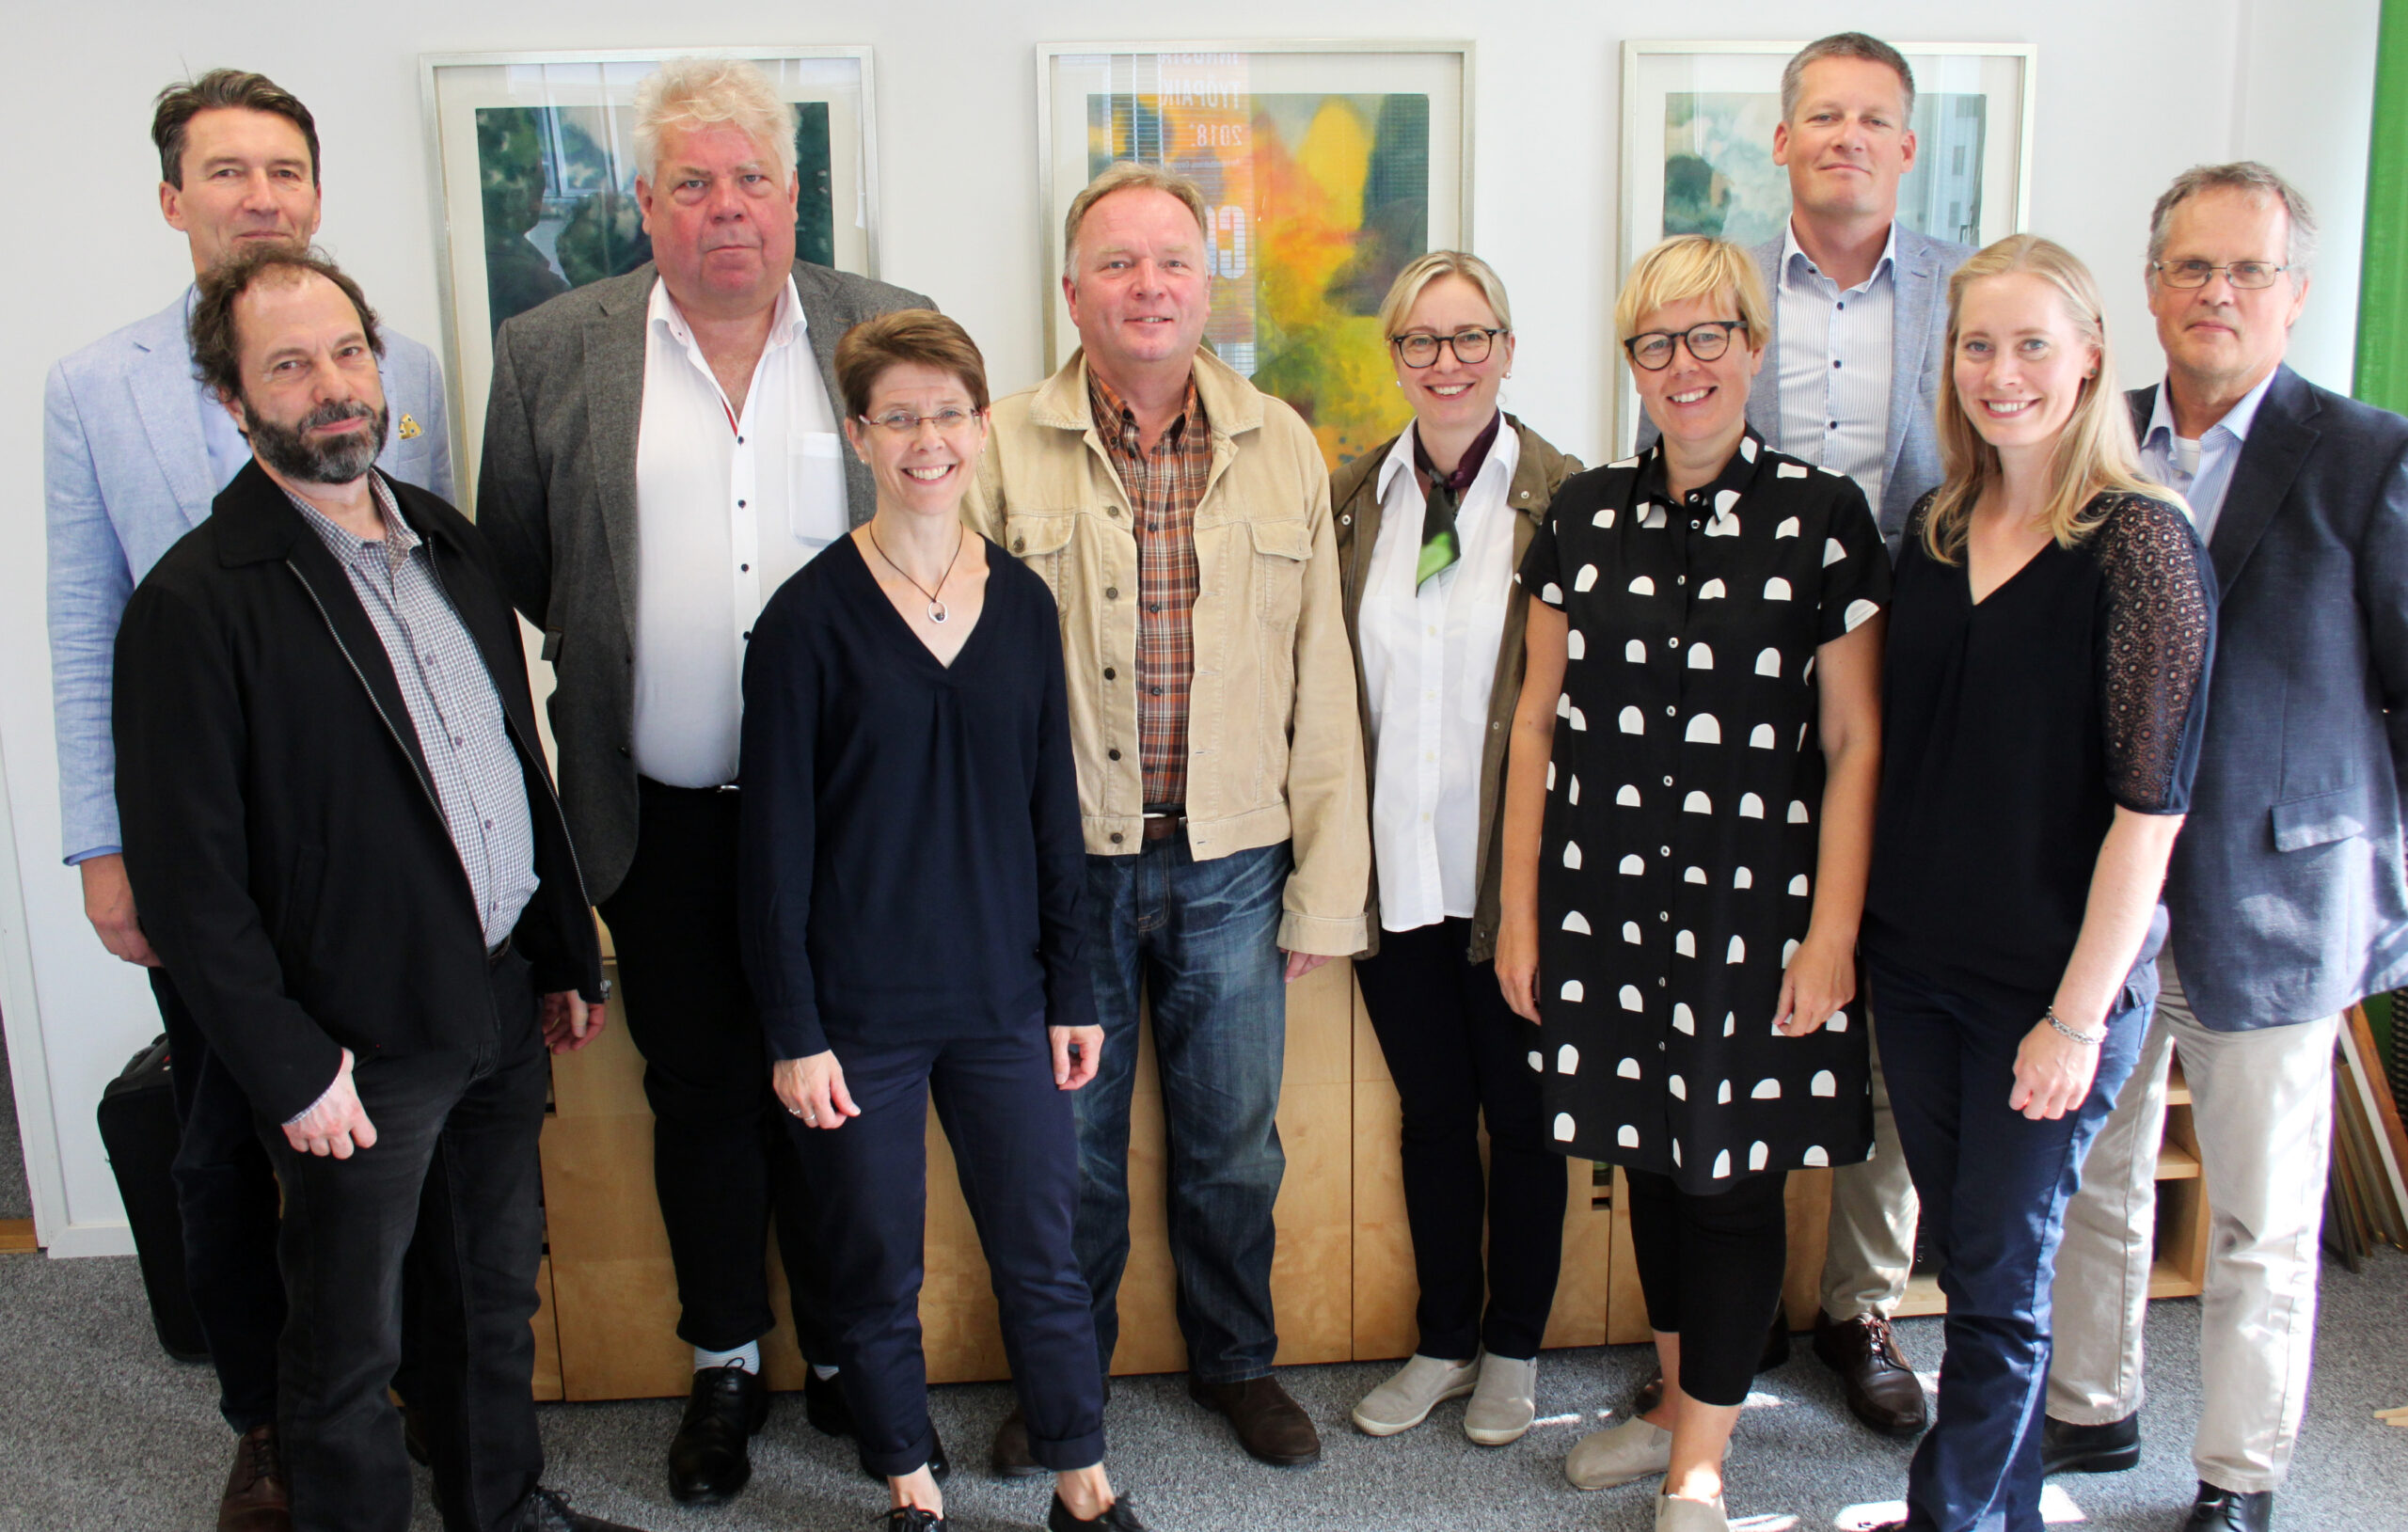 Some of the members of the working group for the Forest Academy for EU Decision Makers at a meeting in Helsinki, in August 2018. Top row from left: Anders Portin, Lars Högbom, Kai Lintunen, Terhi Koipijärvi, Teemu Seppä, Peter Blombäck. Front row: Mika Mustonen, Karoliina Niemi, Annamari Heikkinen, Elina Antila.